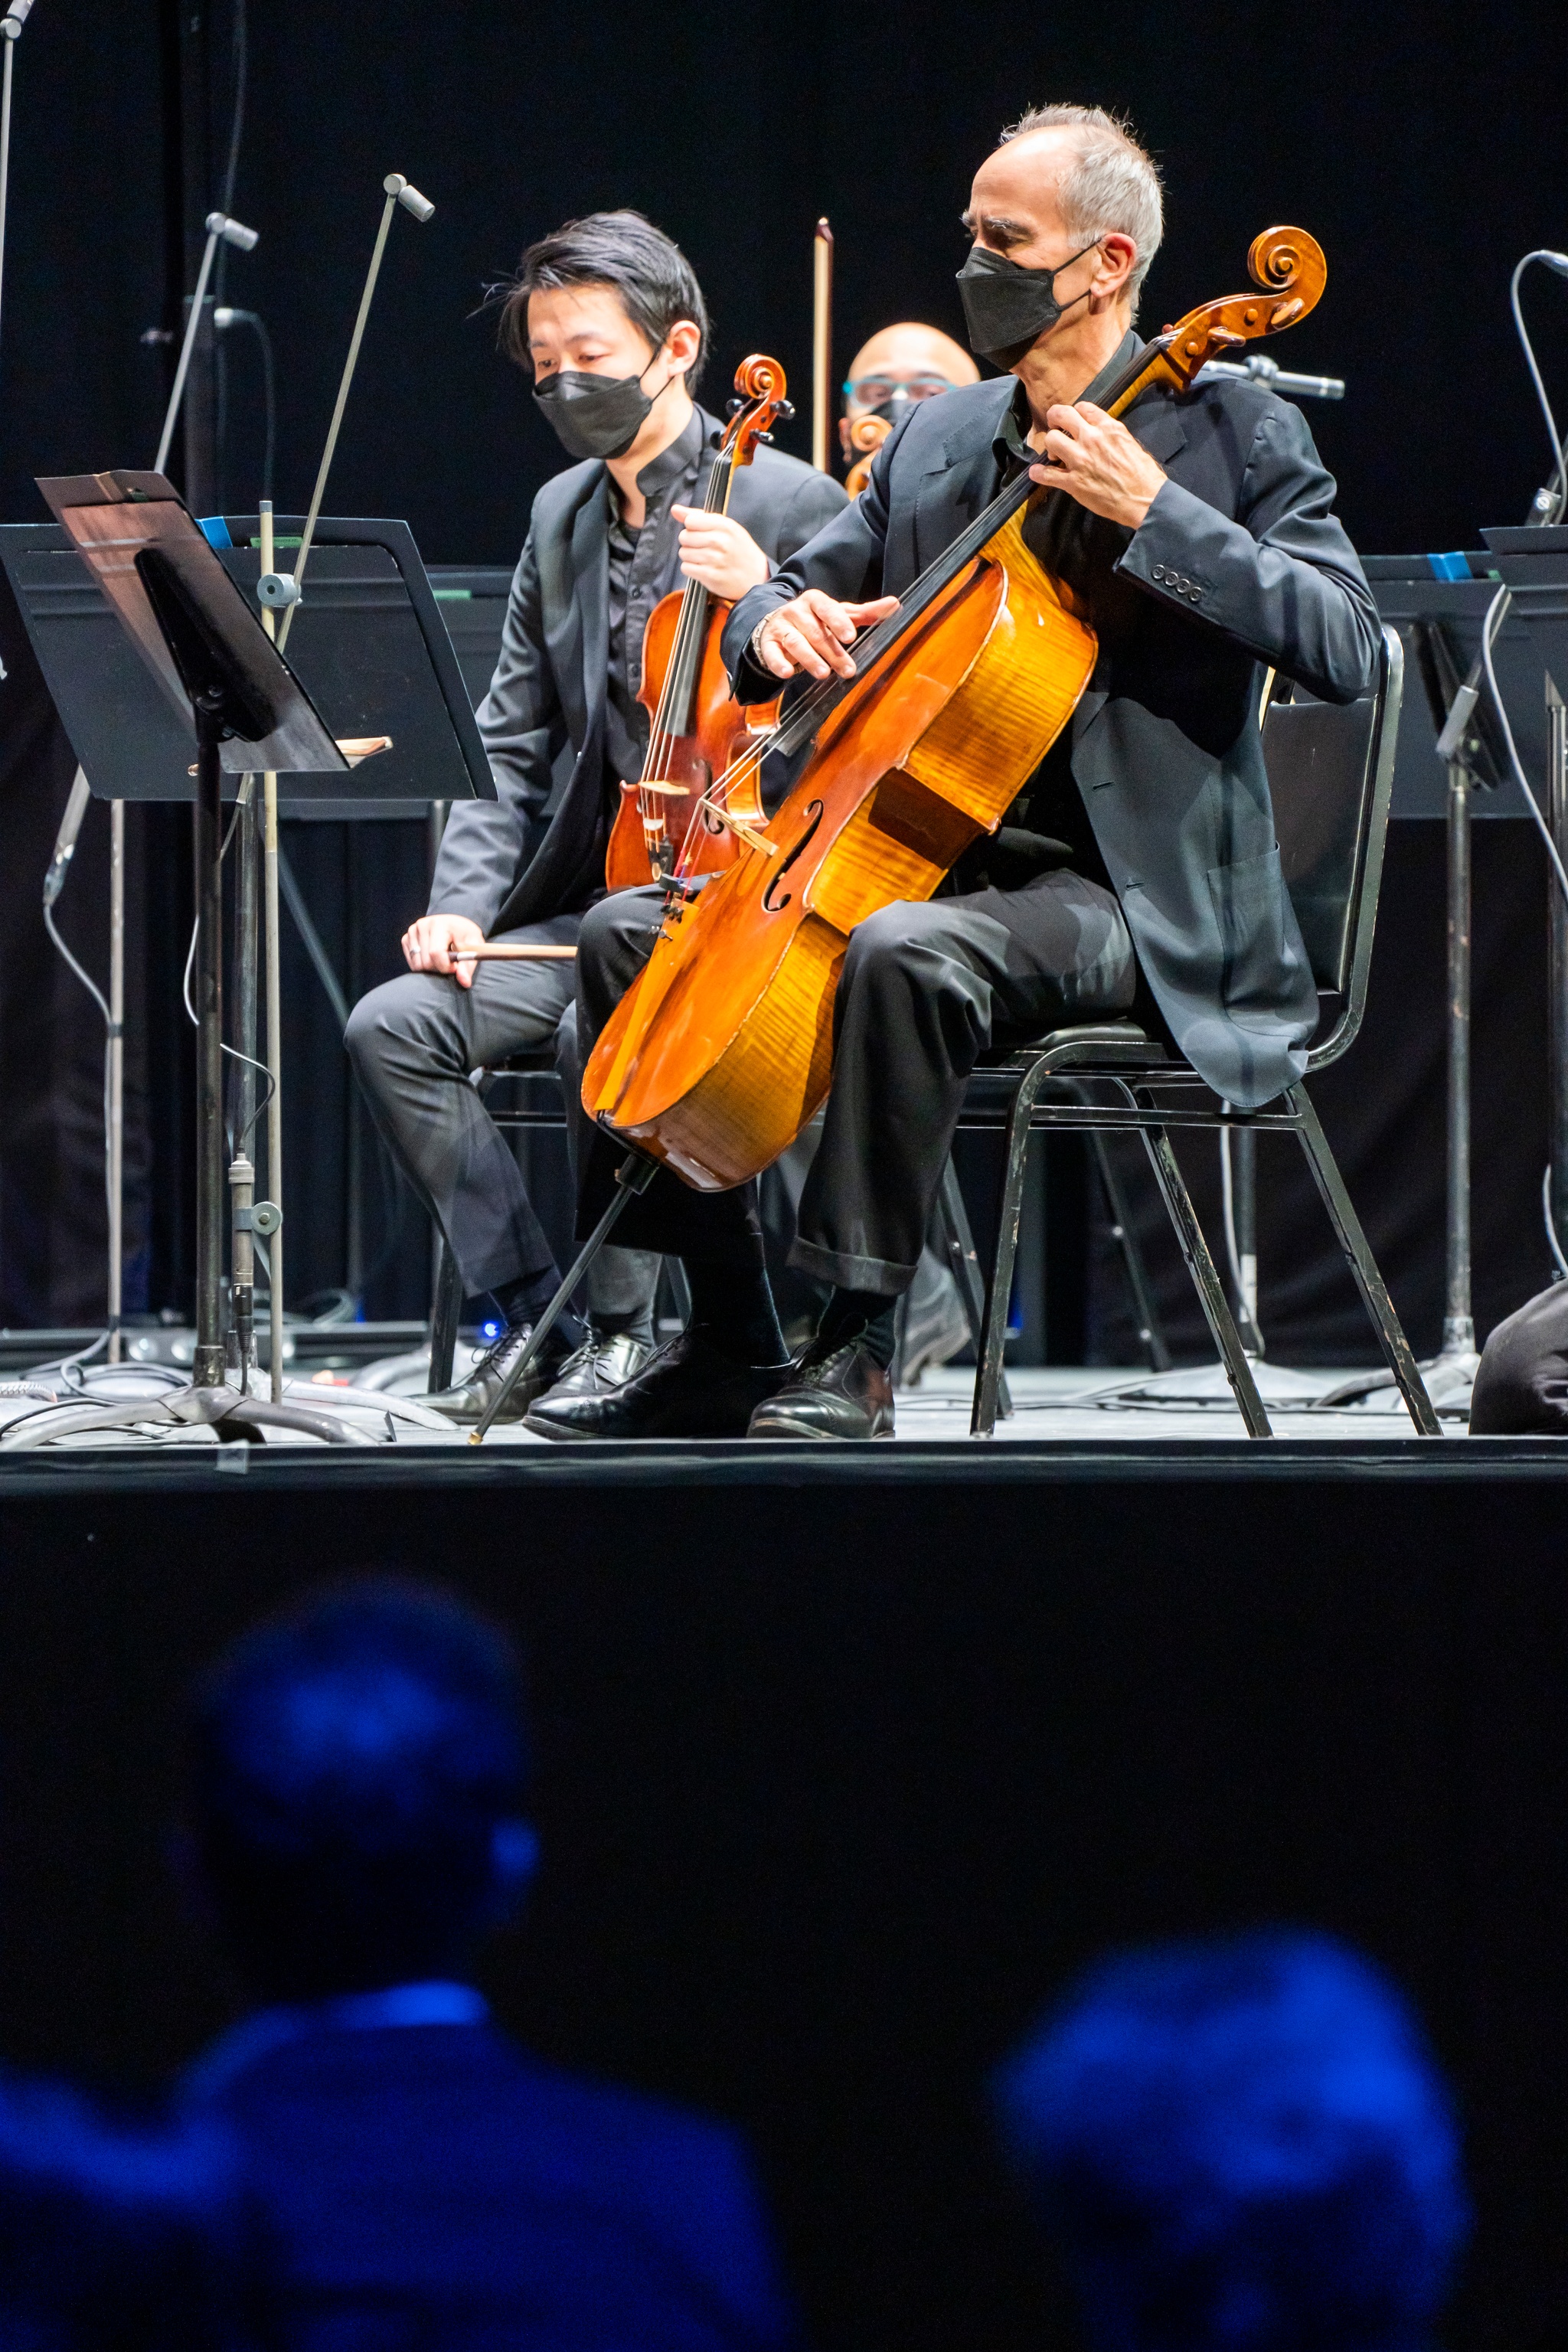 A cellist and violist seen on stage with an audience sitting in shadowy blue light beneath and in front of them.